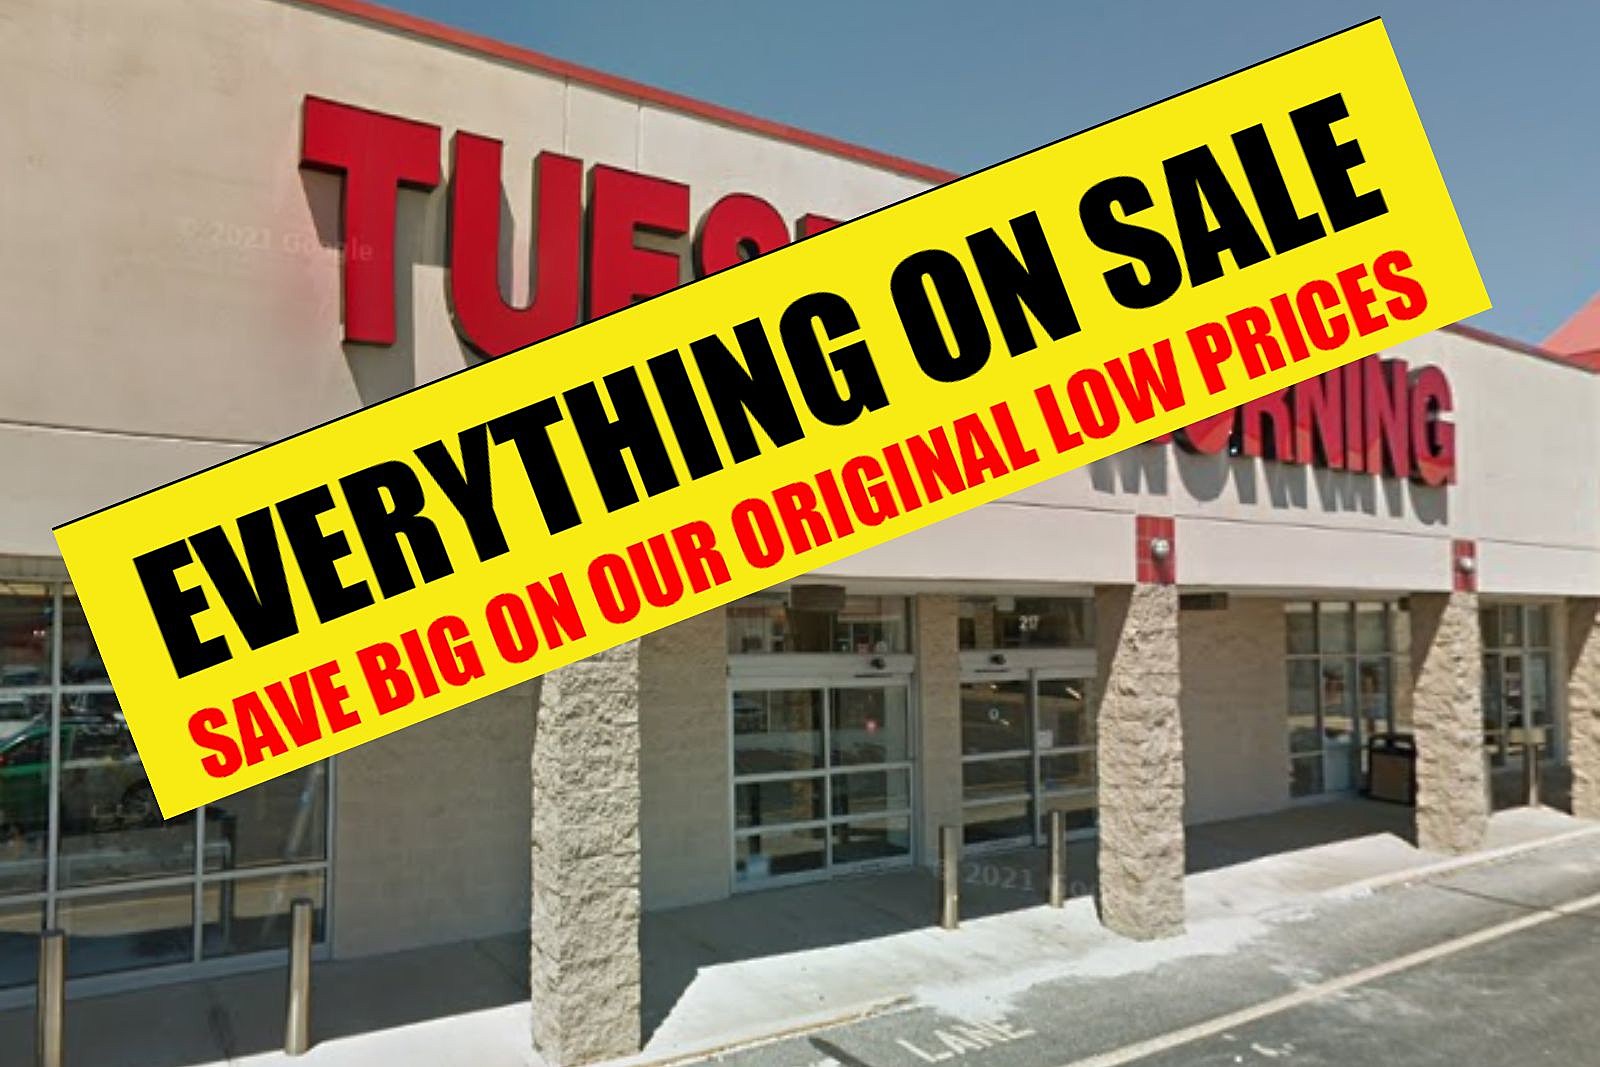 Burlington Coat Factory Wants You to Focus on Everything But Coat Sales -  Bloomberg